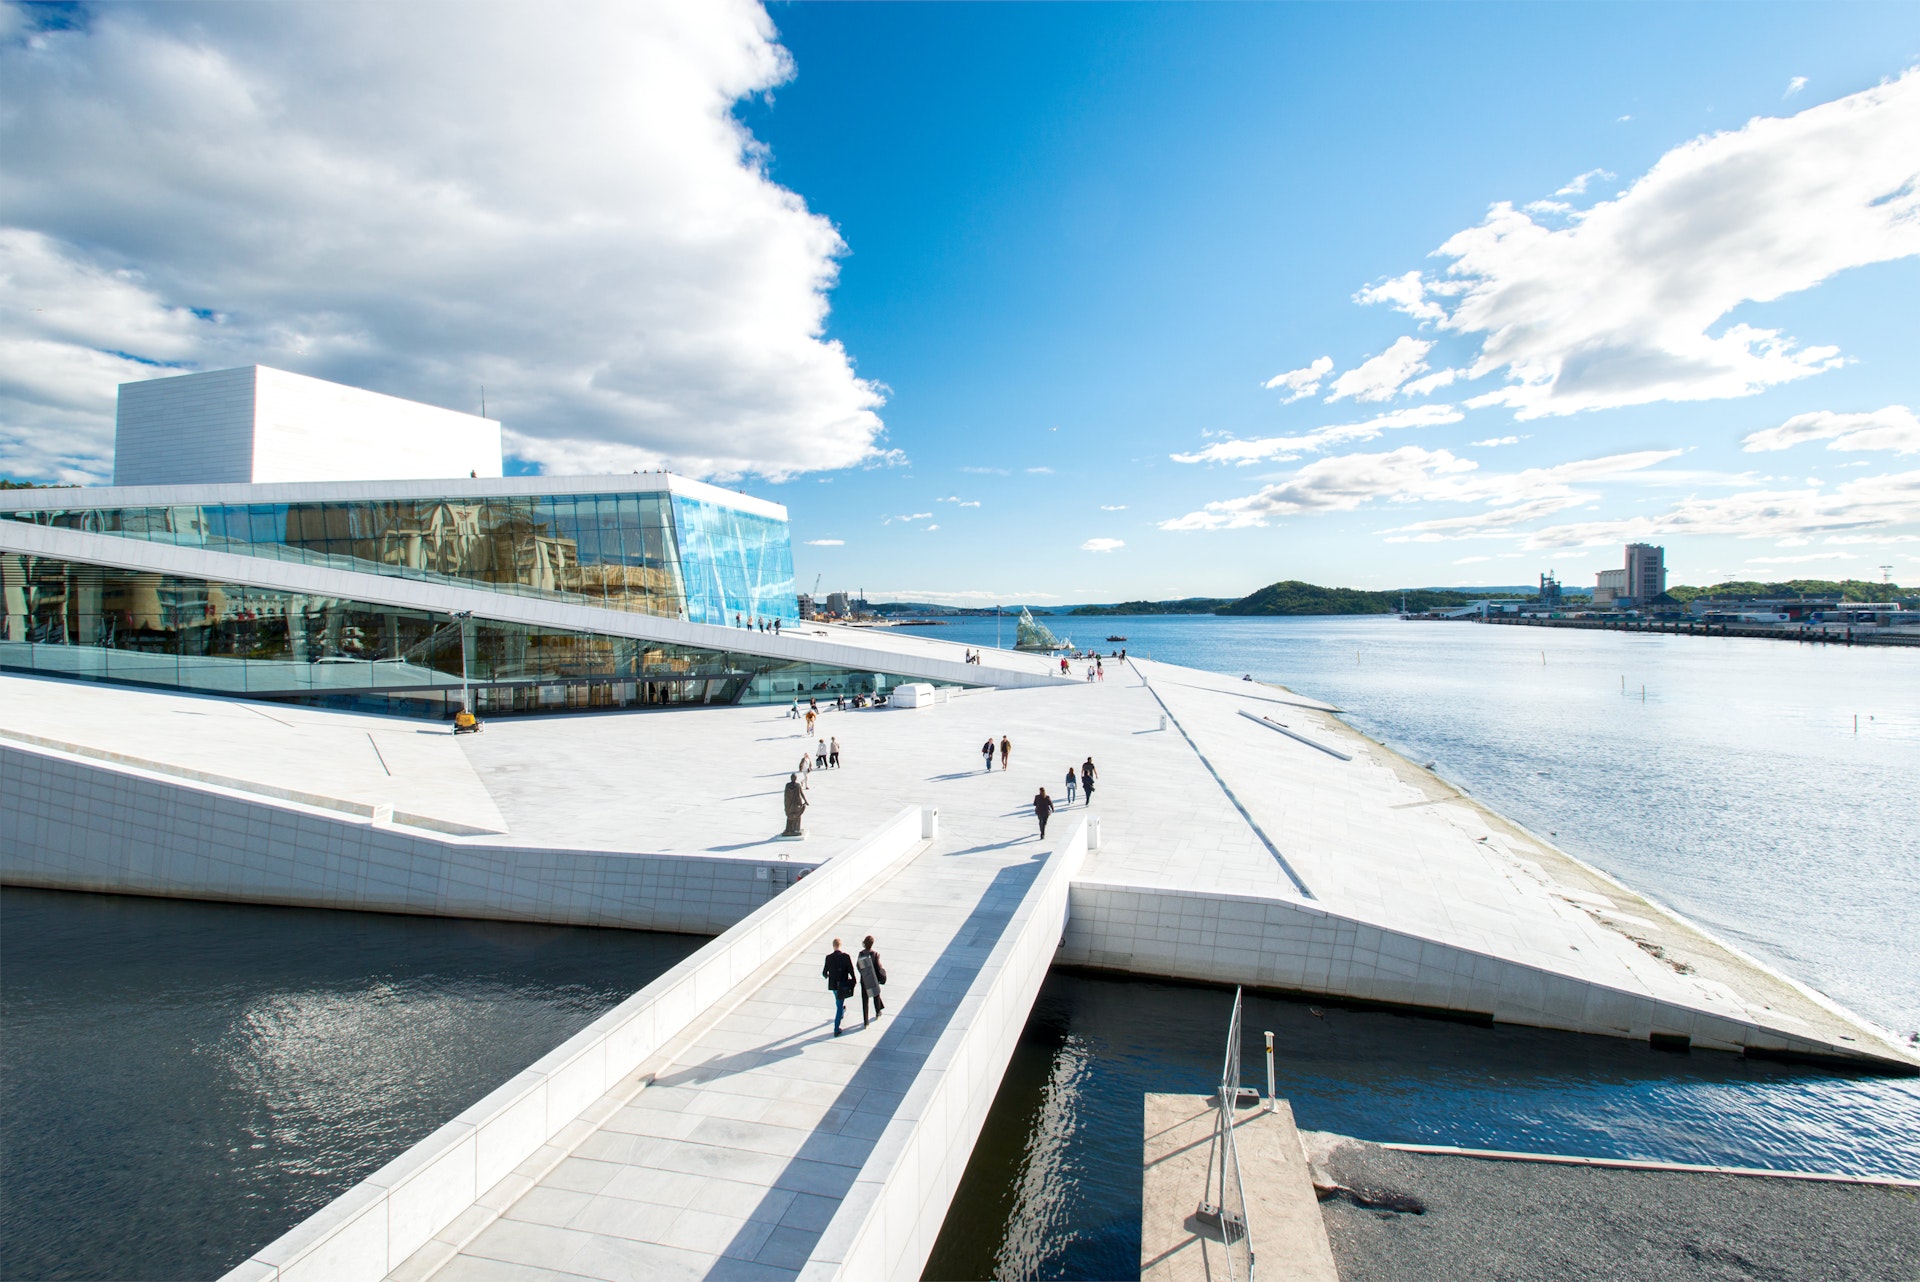 View on a side of the National Oslo Opera House which was opened on April 12, 2008 in Oslo, Norway